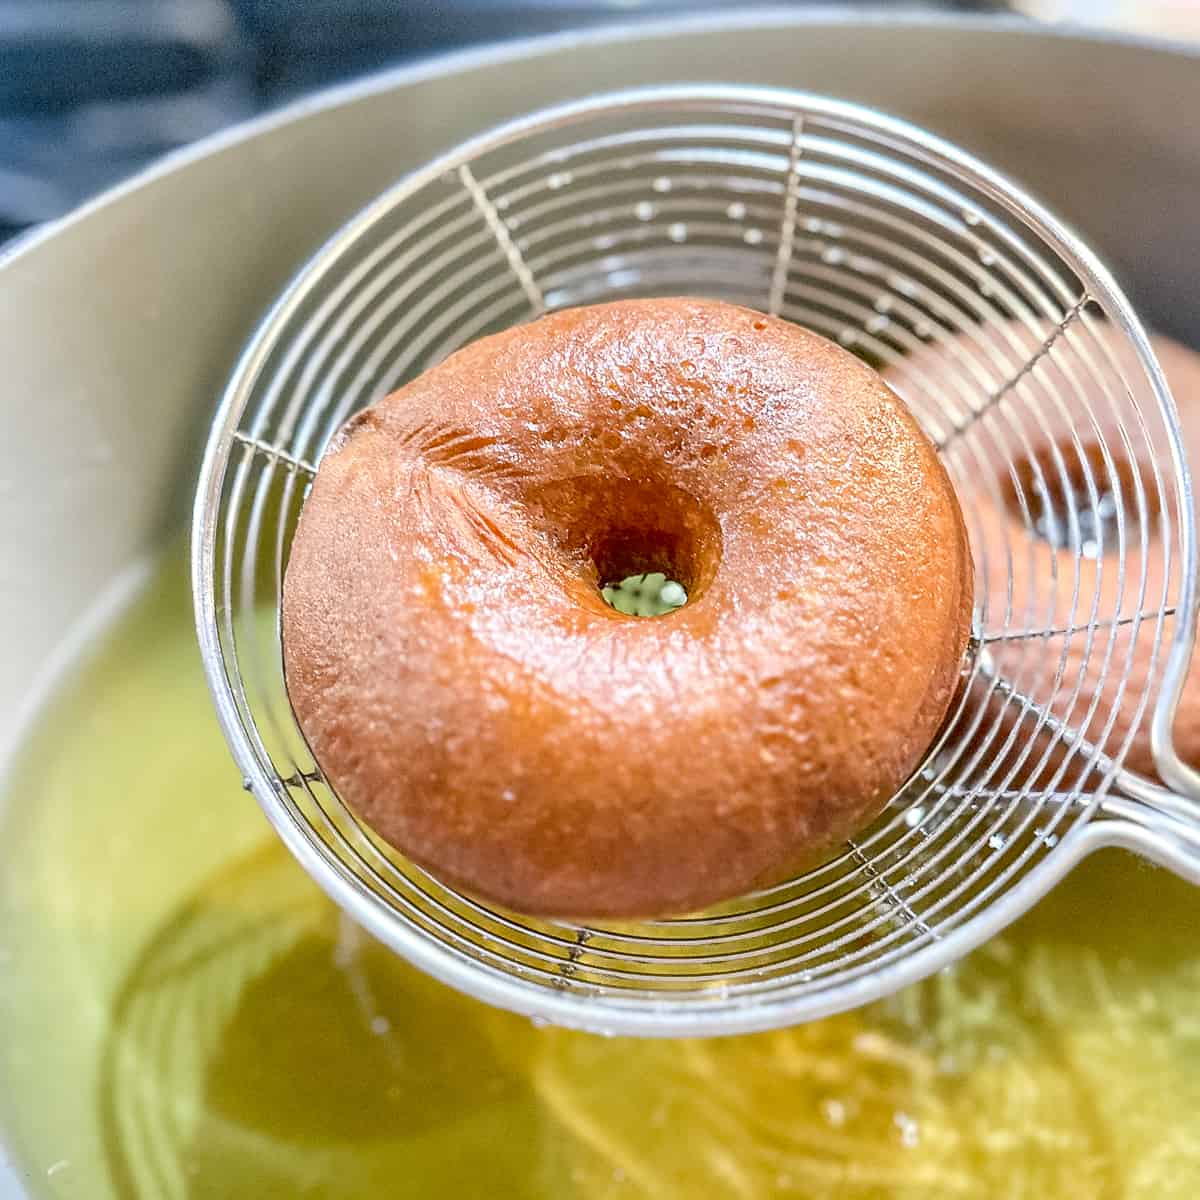 using a metal strainer to remove a fried donut from oil.